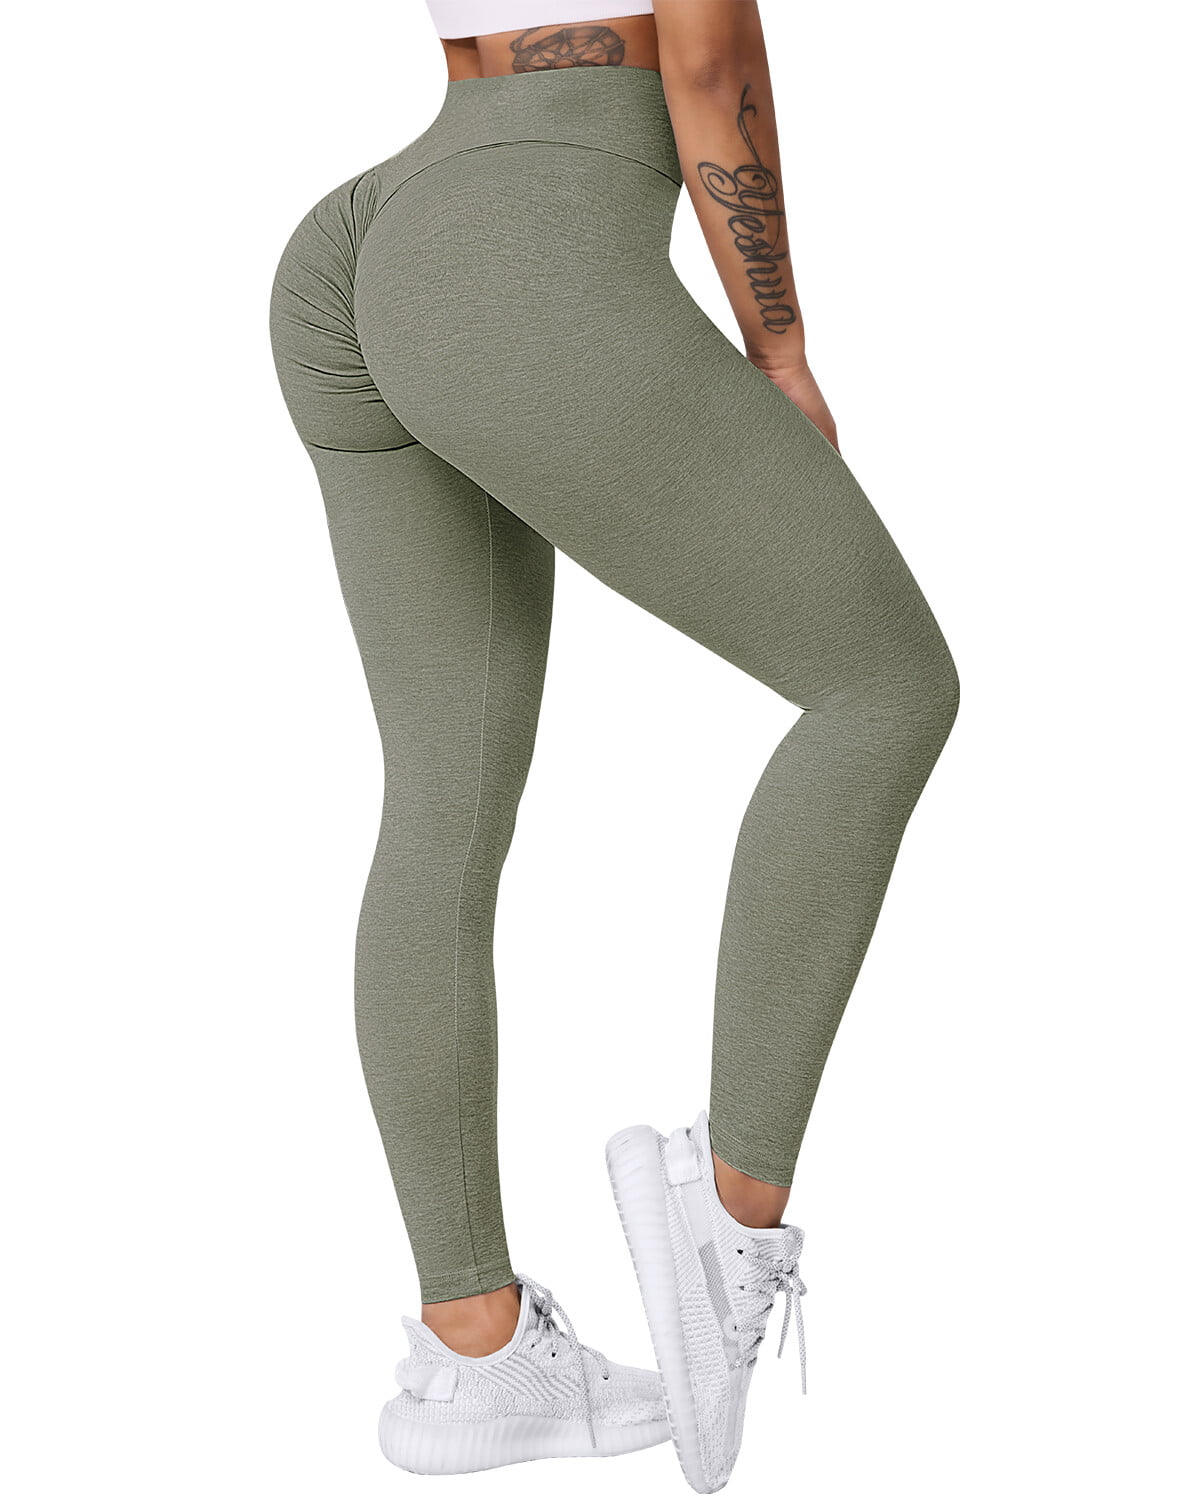 Calf Length Color Striped Yoga Leggings, Gender : Female at Rs 10.50 /  Piece in Mohali